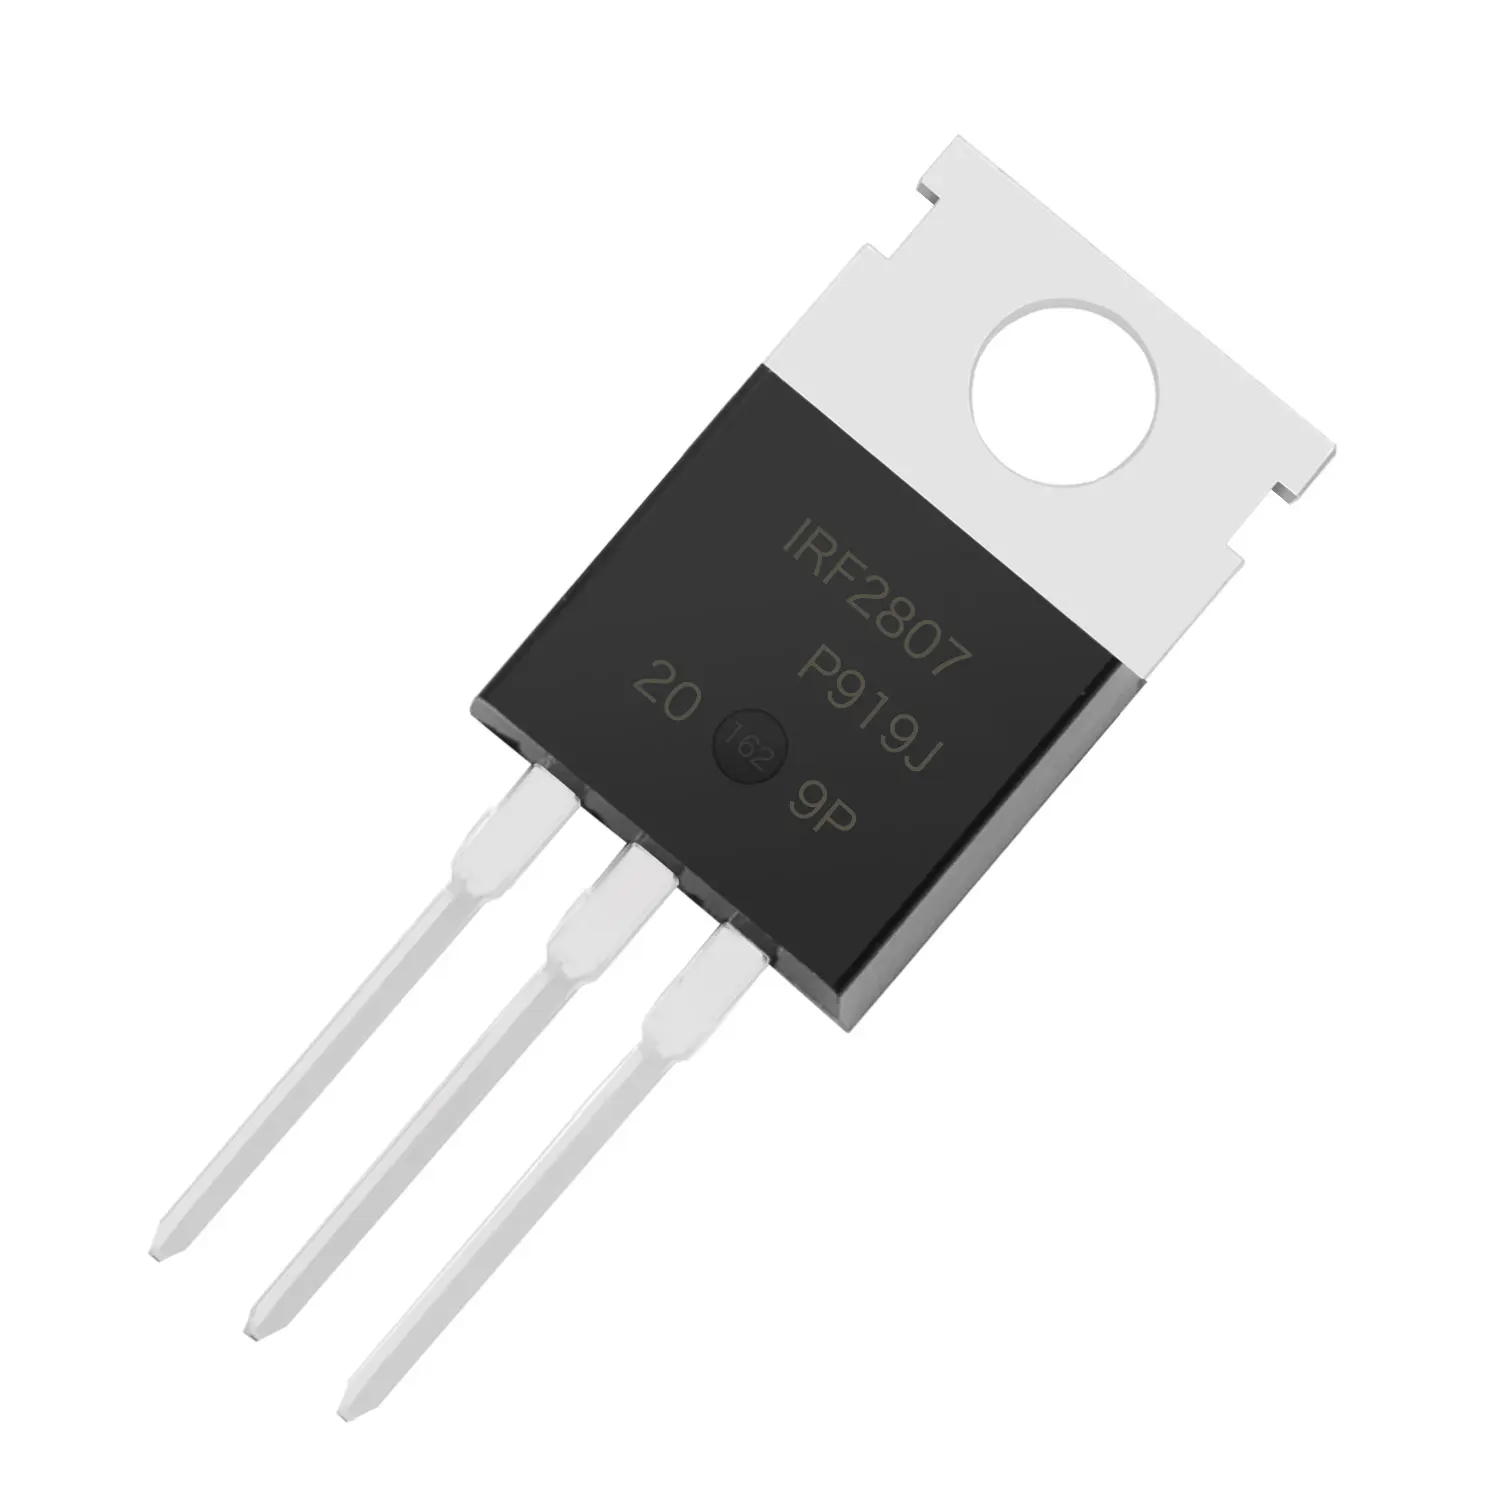 2x irfibc 20 gpbf Transistor N-MOSFET unipolaire 600 V 1,1 A 30 W to220ab